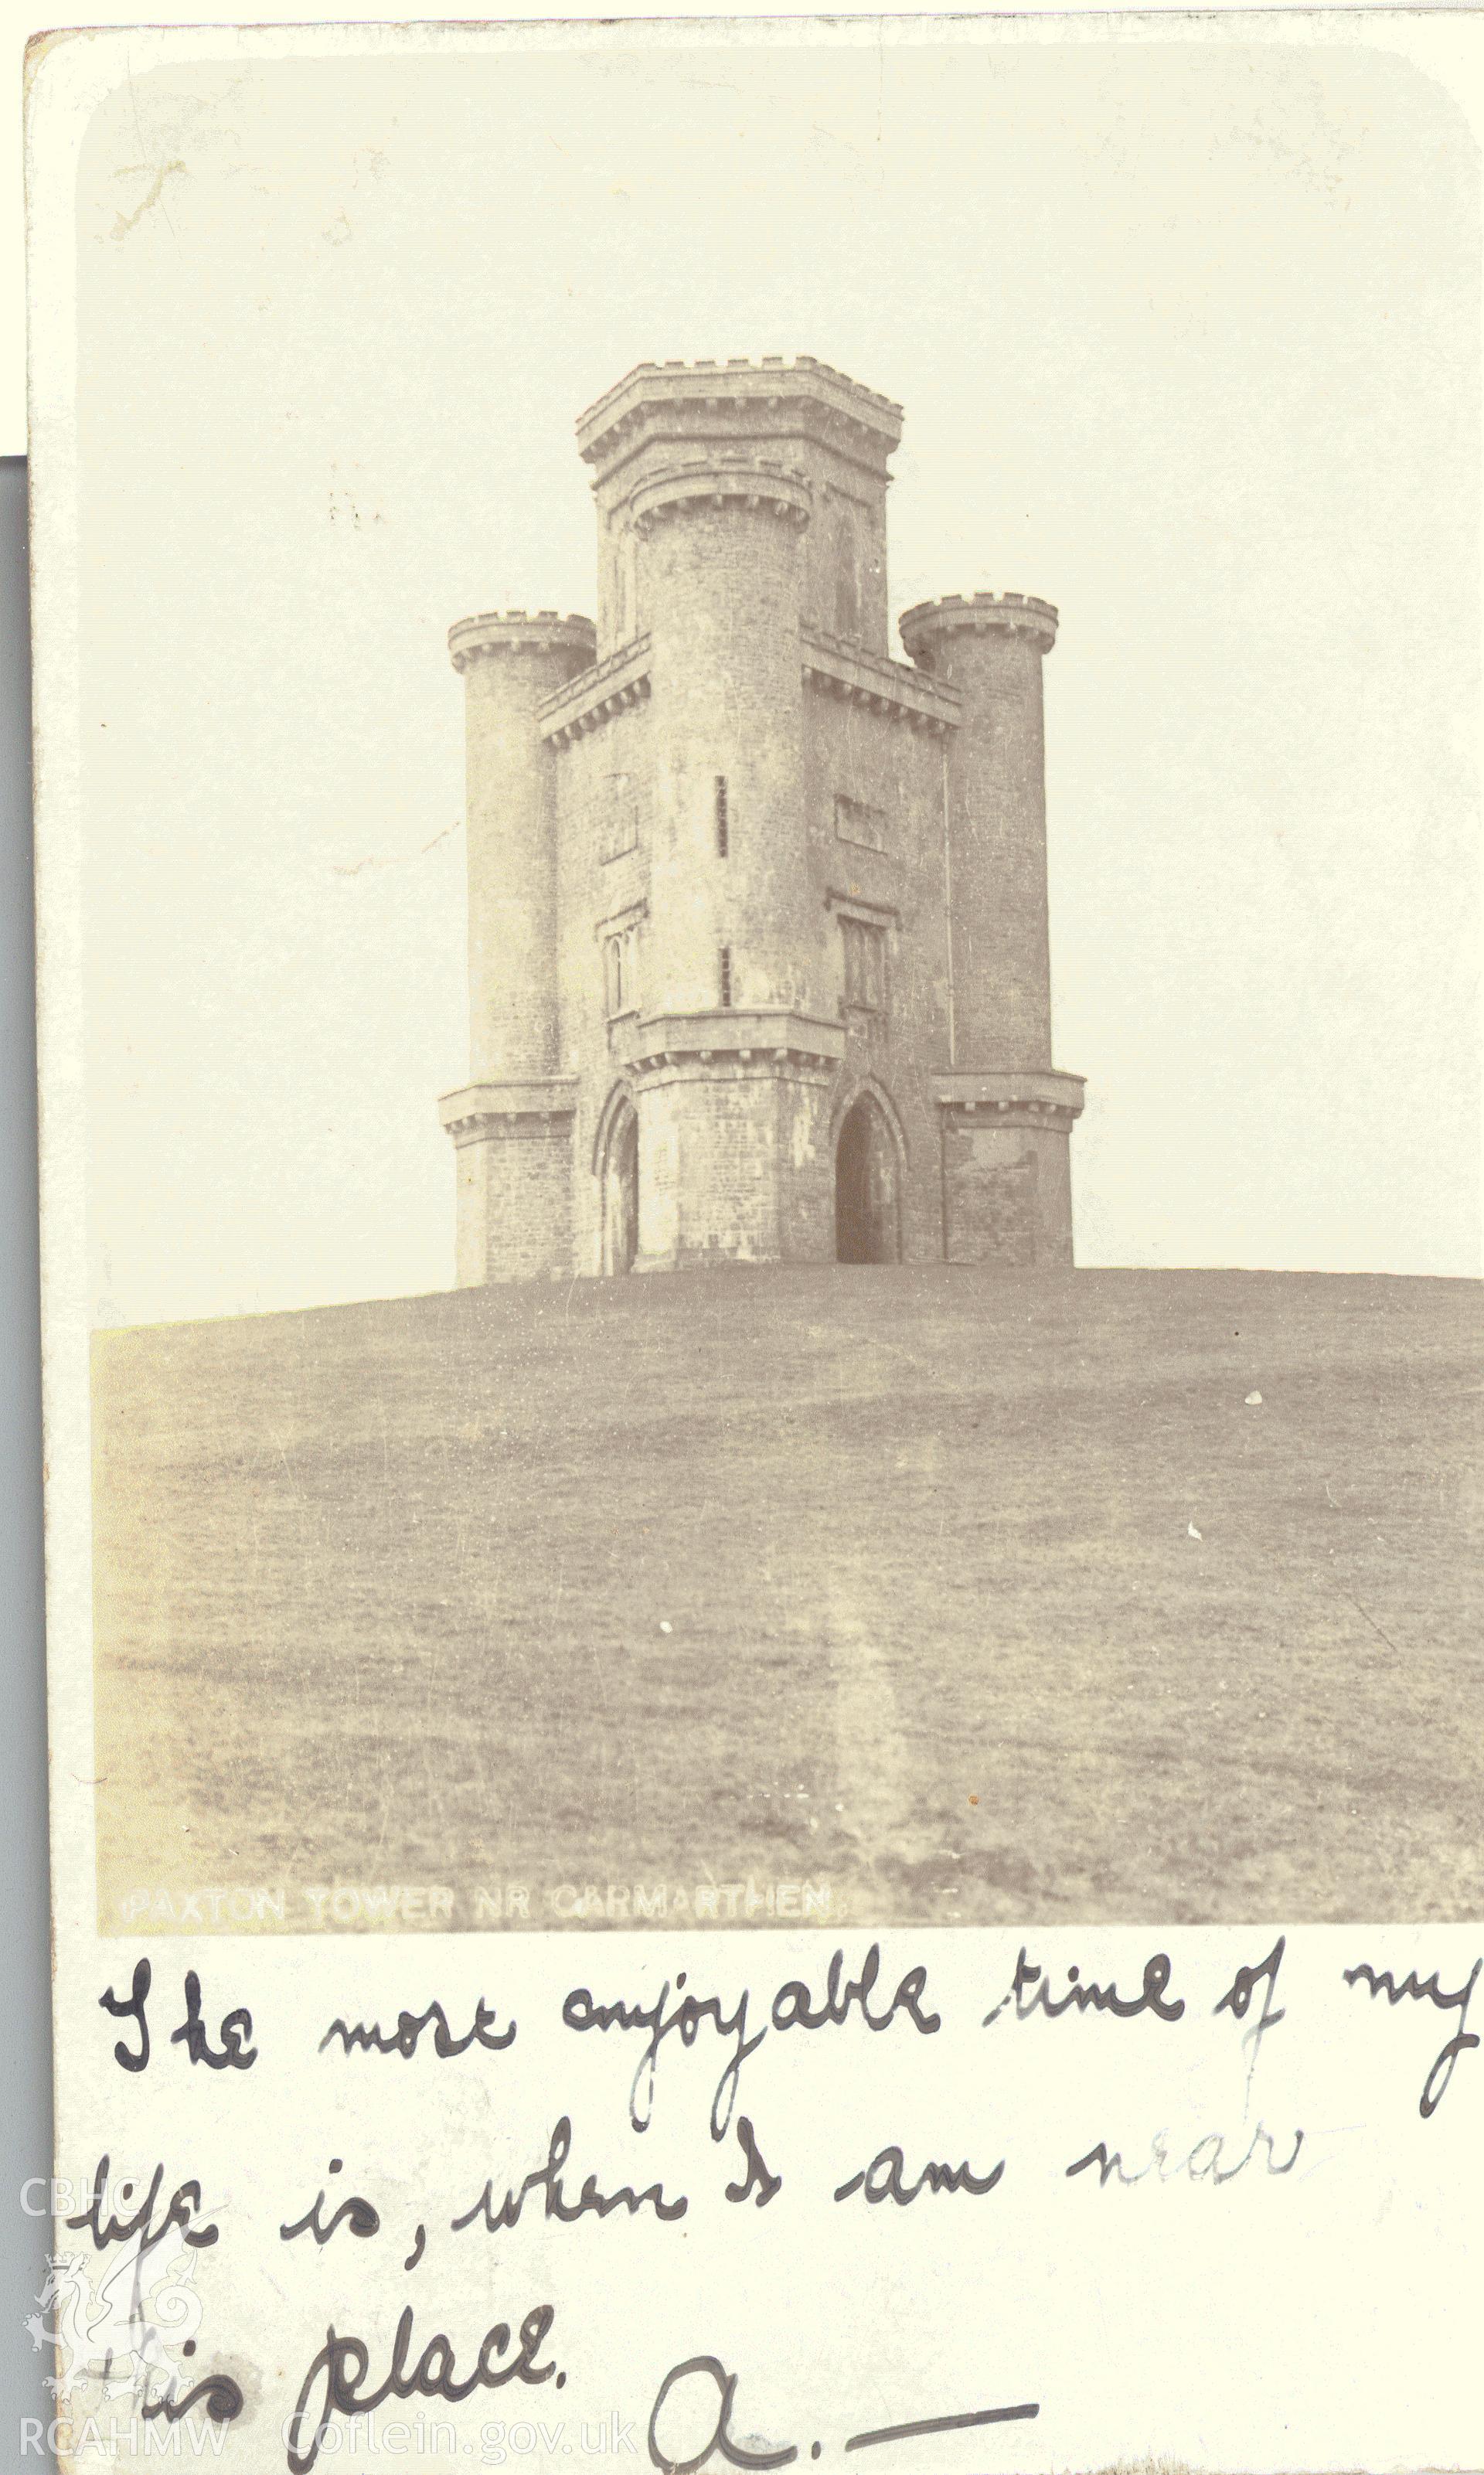 Digitised postcard image of Paxton's Tower, Llanarthney, The Excelsior Photo Co. Ltd , Carmarthen. Produced by Parks and Gardens Data Services, from an original item in the Peter Davis Collection at Parks and Gardens UK. We hold only web-resolution images of this collection, suitable for viewing on screen and for research purposes only. We do not hold the original images, or publication quality scans.